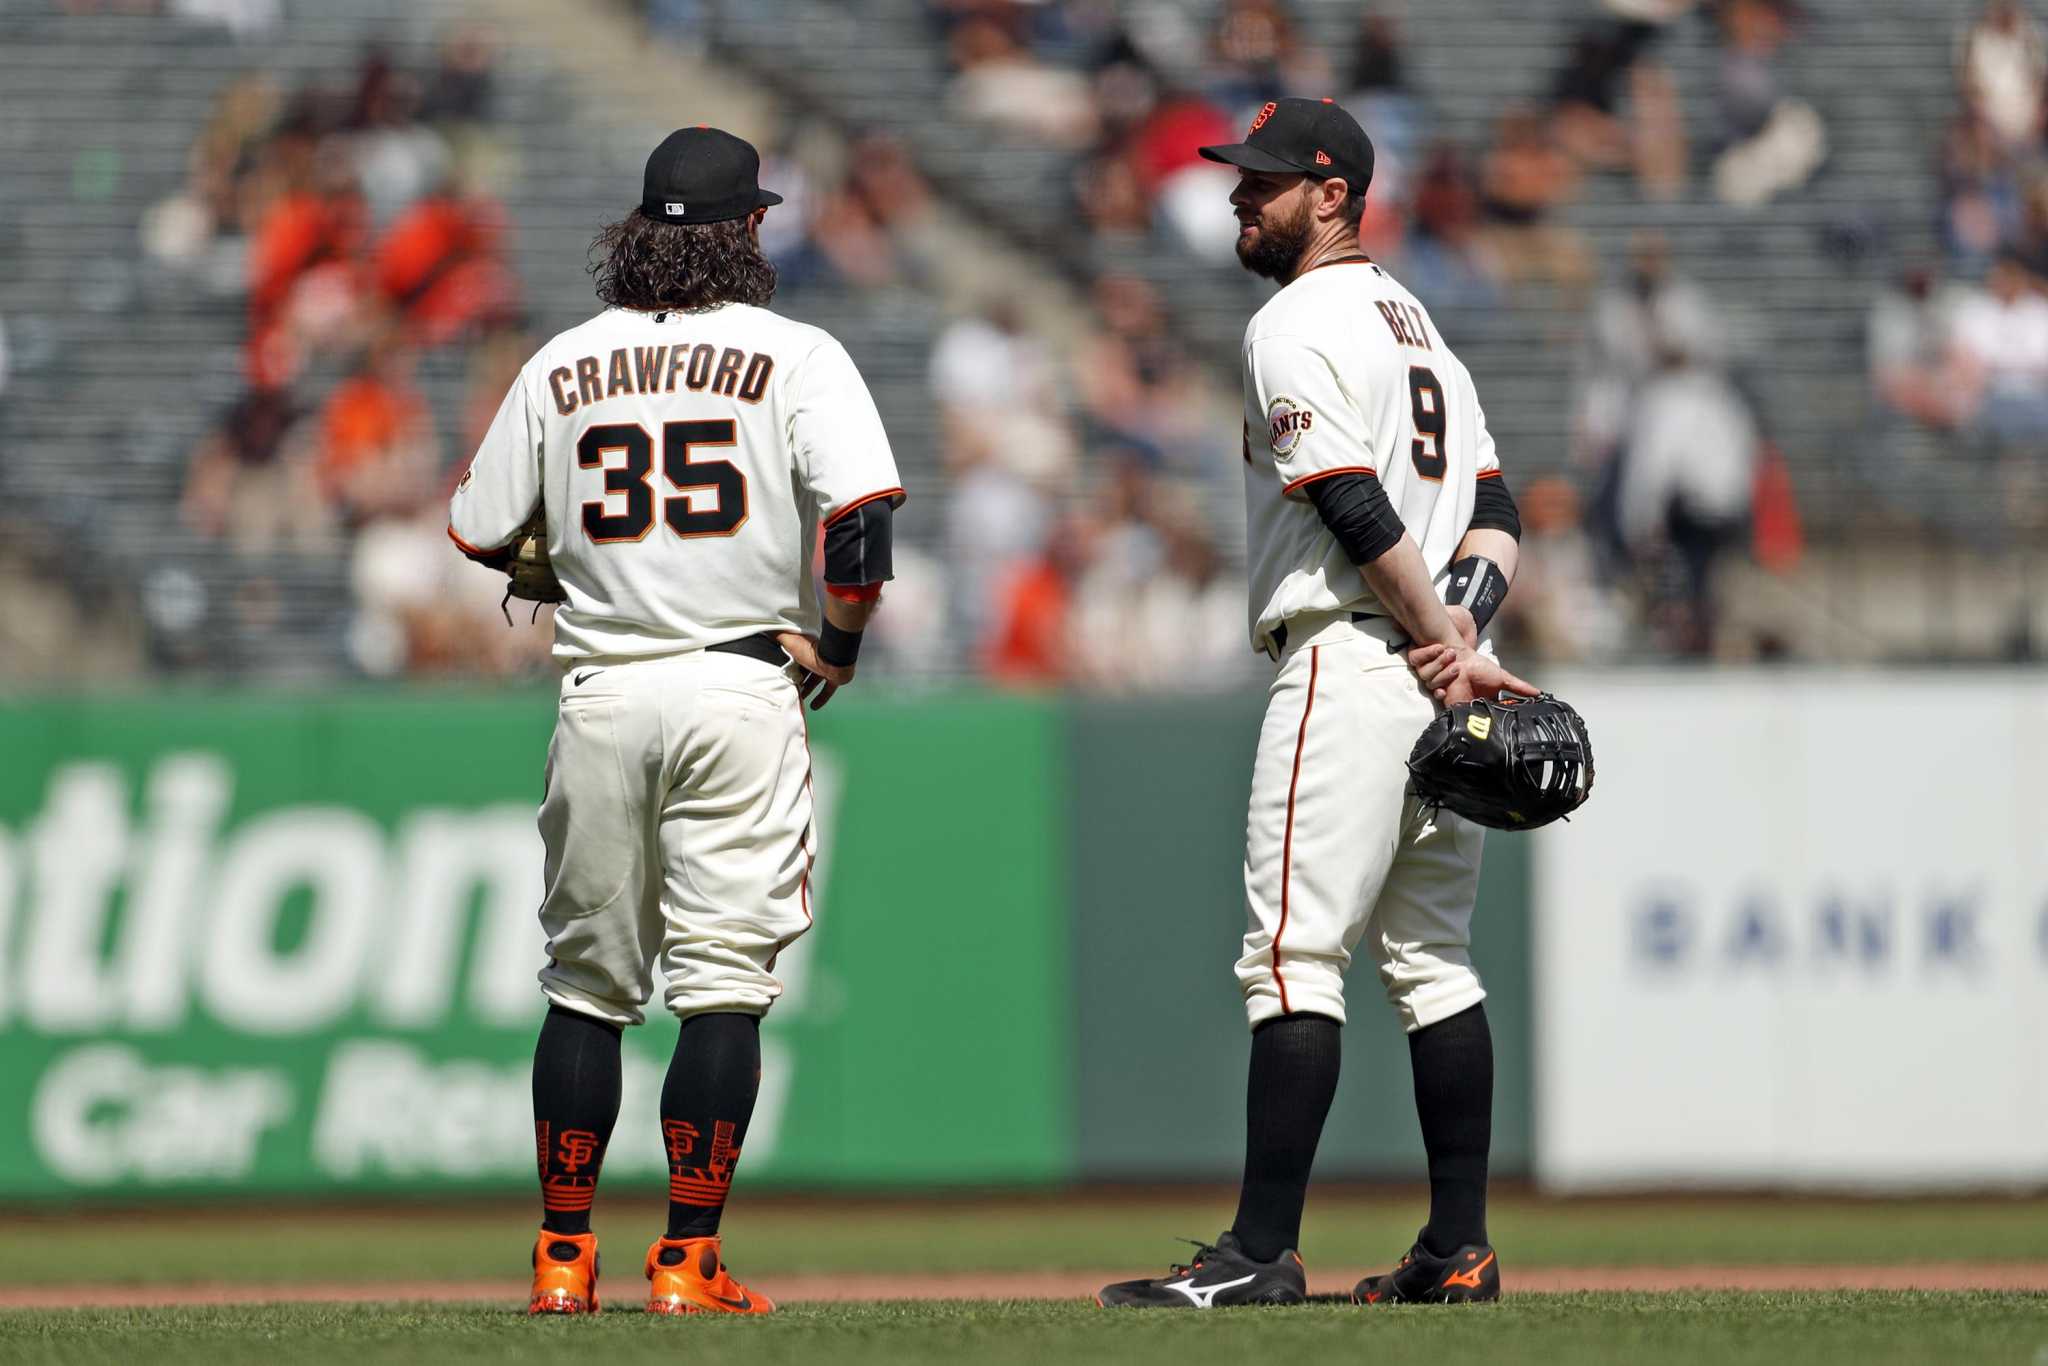 Crawford to Belt and back again, playing catch forged the Brandons' Giants  bond